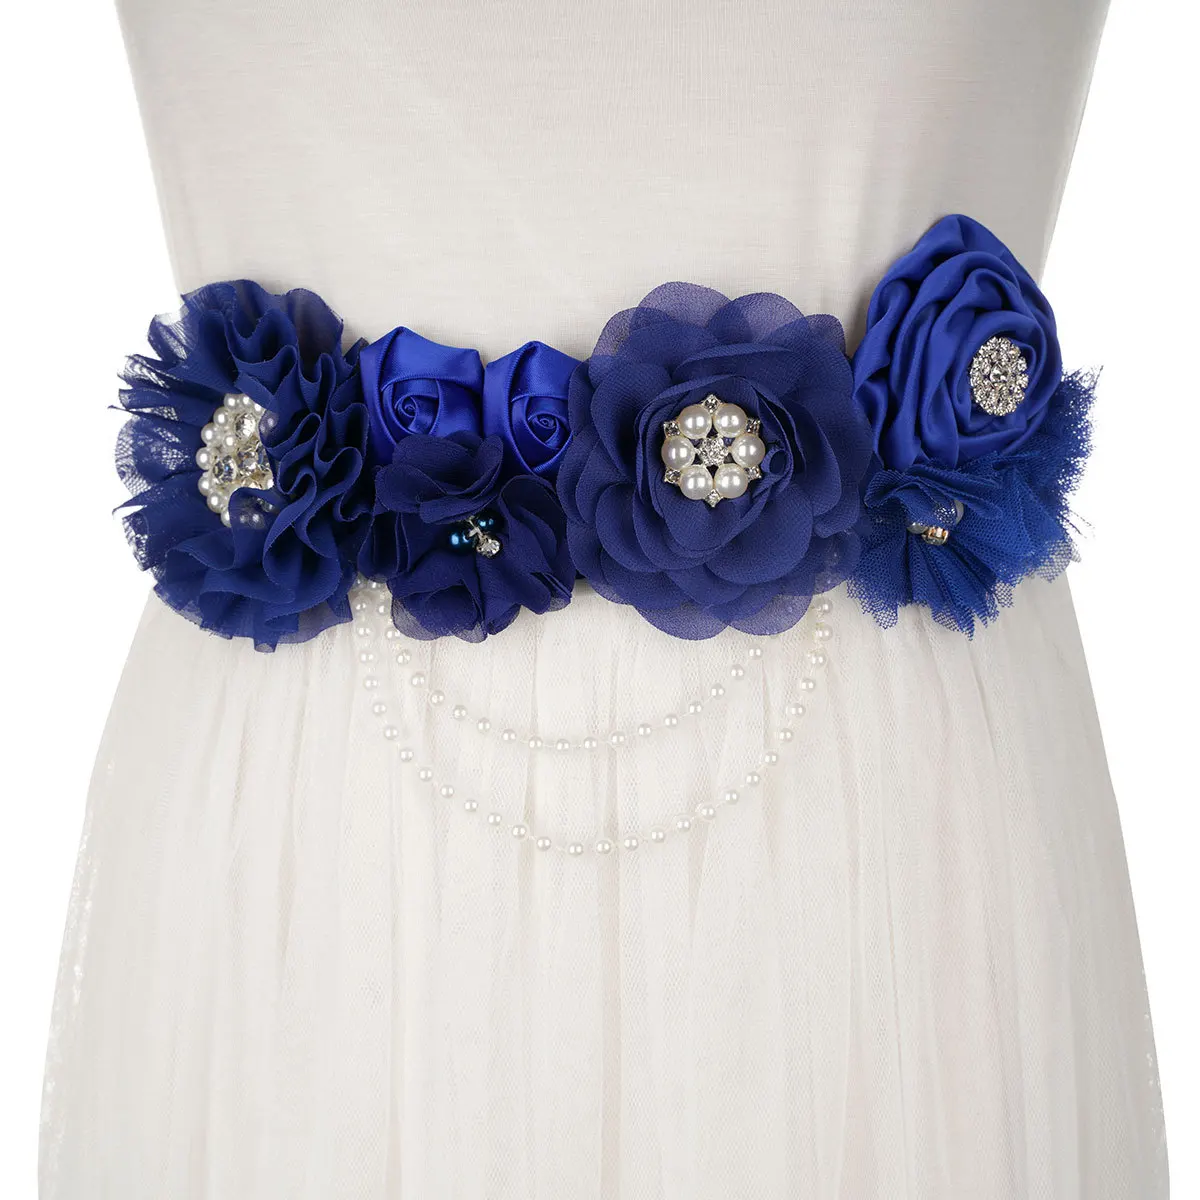 

New Royal Blue Handmade Flowers Pearls Belt Bridesmaid Gown Sash for Women Accessories Dress Matching